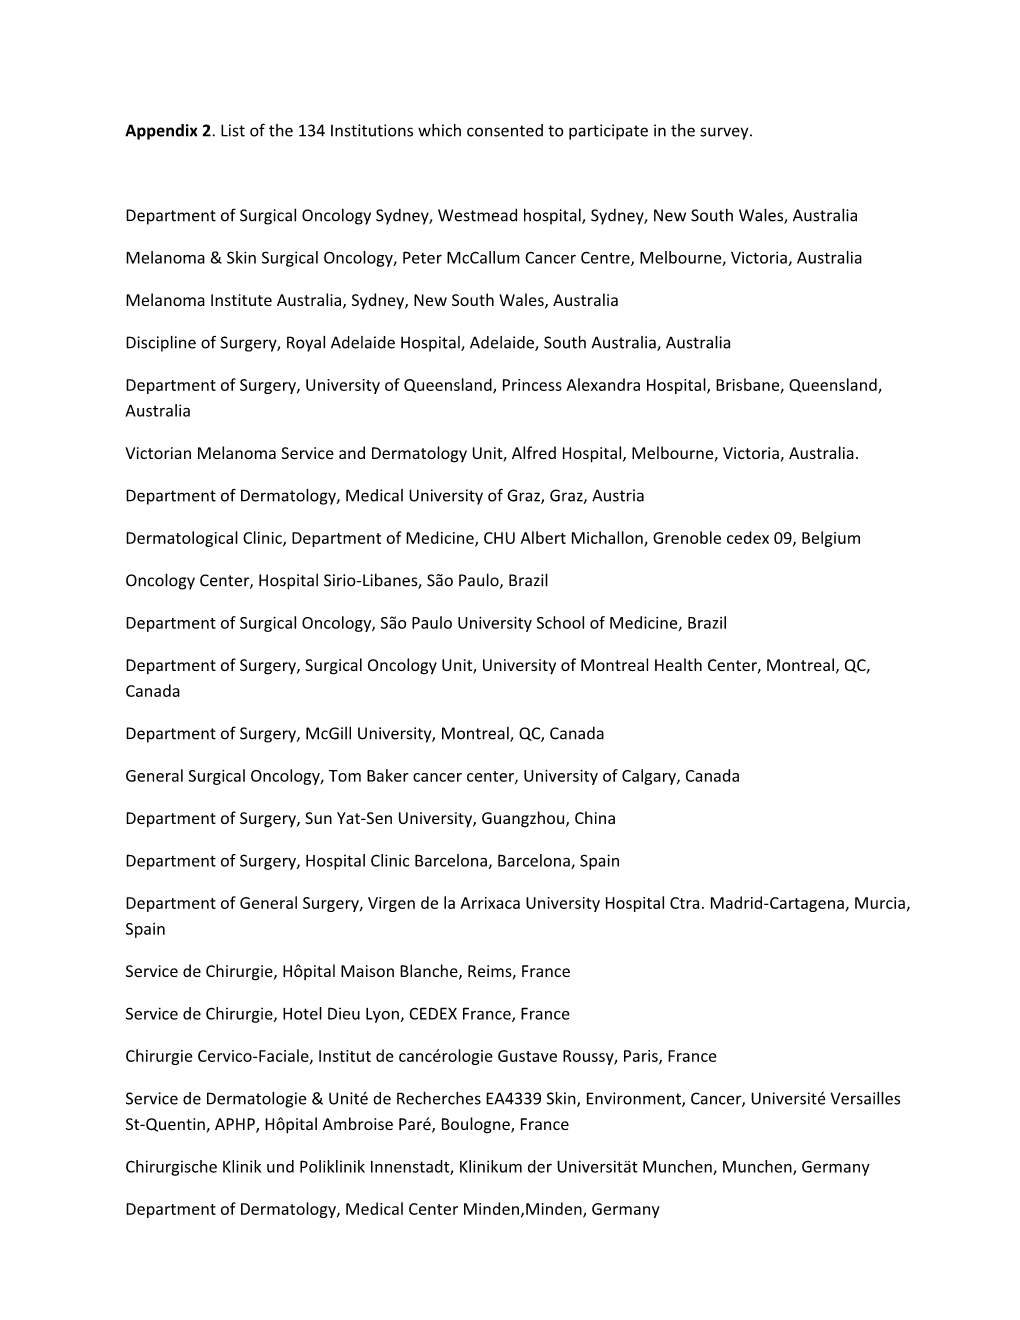 Appendix 2. List of the 134 Institutions Which Consented to Participate in the Survey